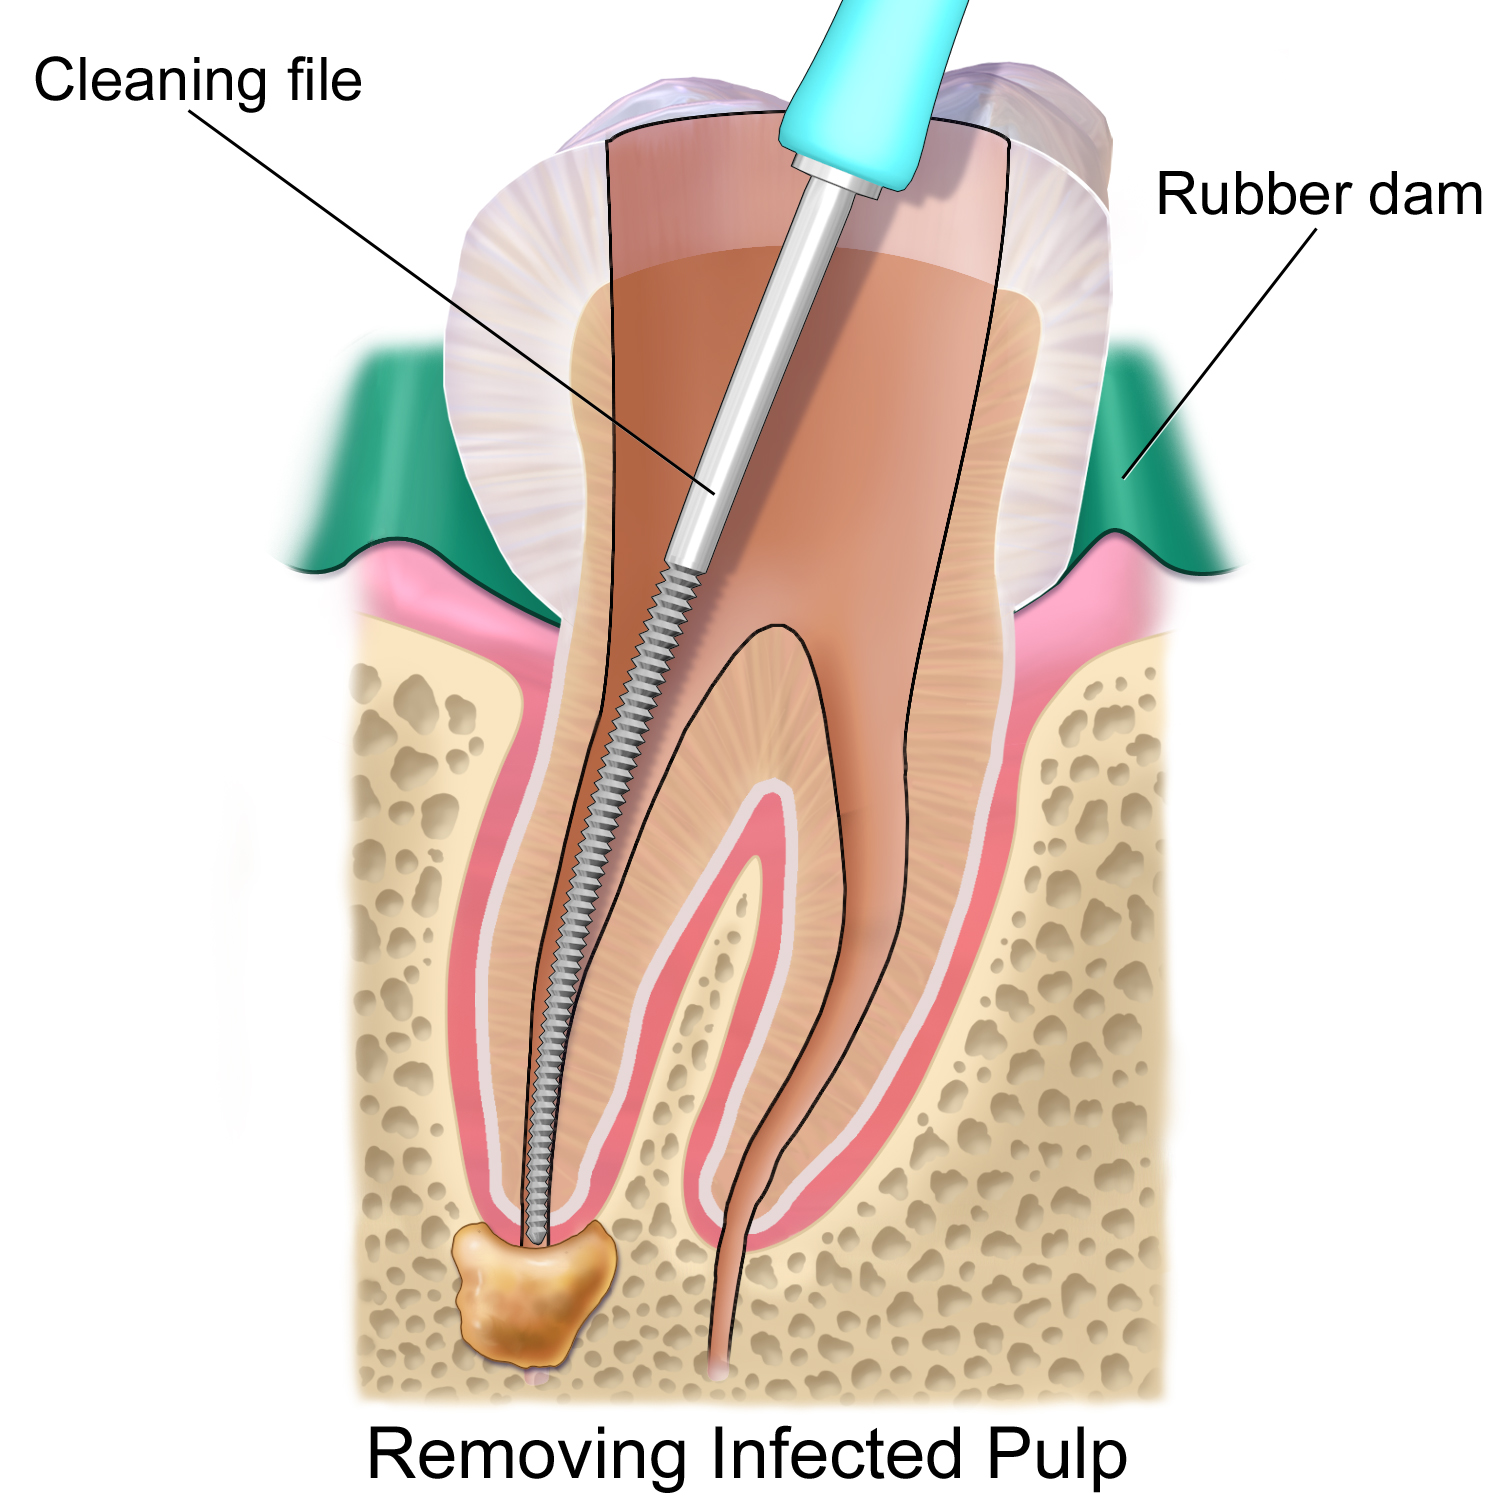 http://laserdentalclinicbangalore.com/laser-assisted-root-planing.php